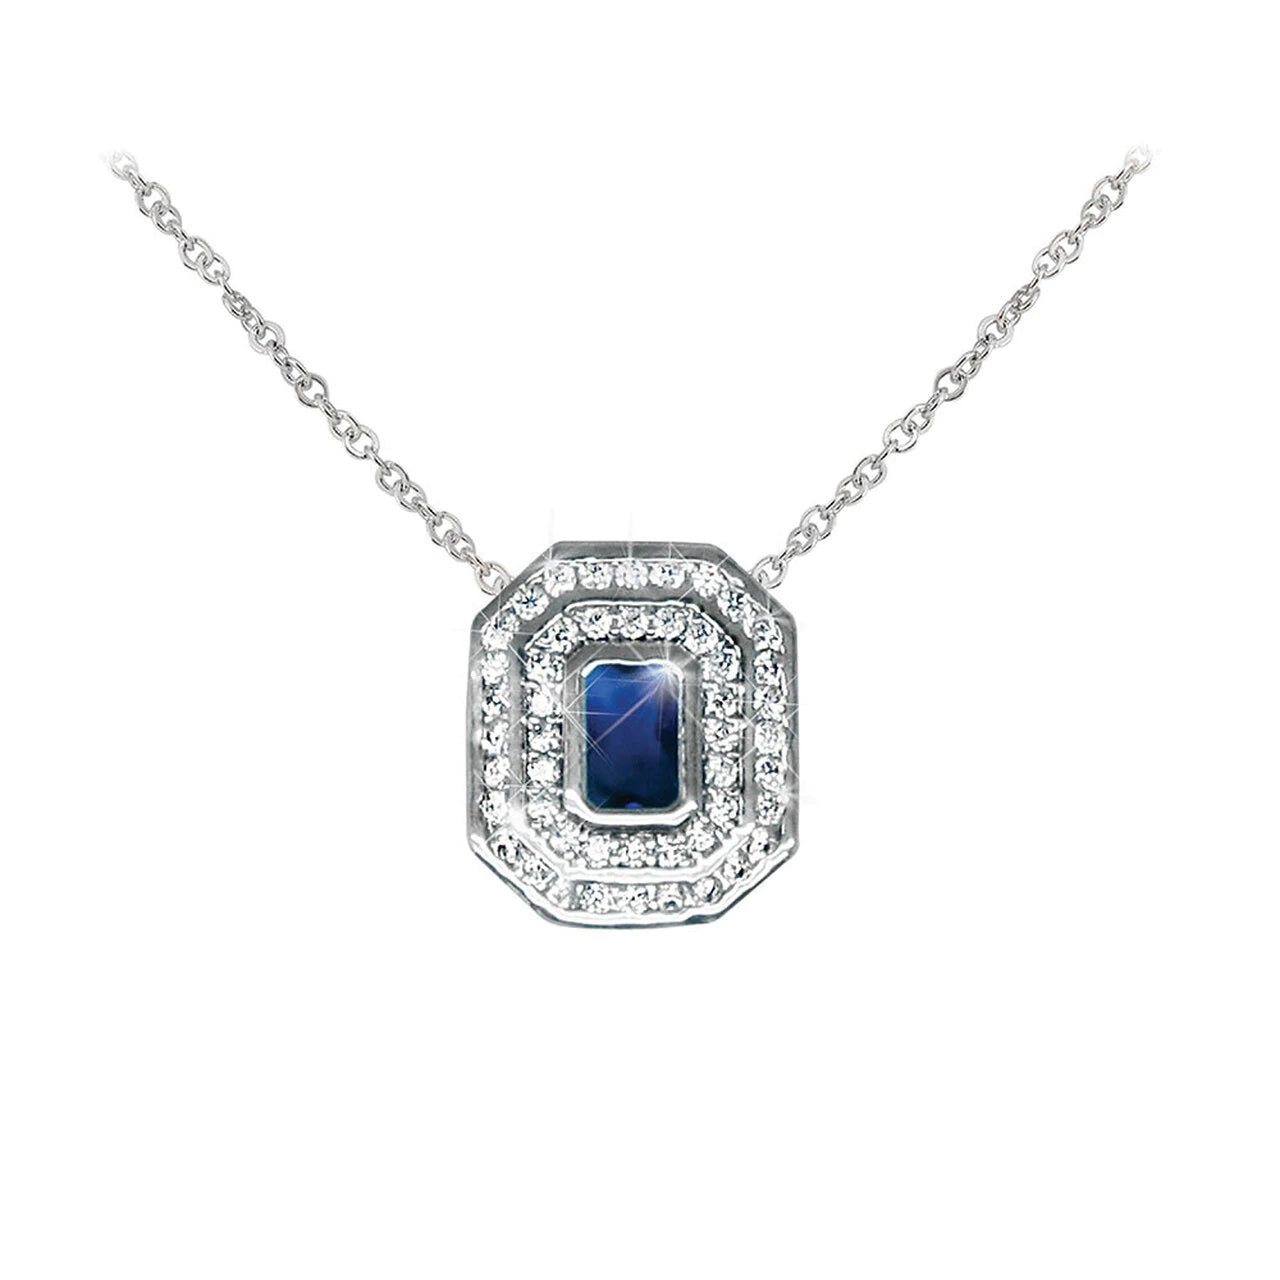 Tipperary Crystal Silver Pendant Sapphire & White Stone Surround  Elegance and pizzaz are presented in equal measure with this rich sapphire pendant. The dazzling double halo of bright round clear crystals intensiﬁes the radiance of the blue emerald-cut center stone.